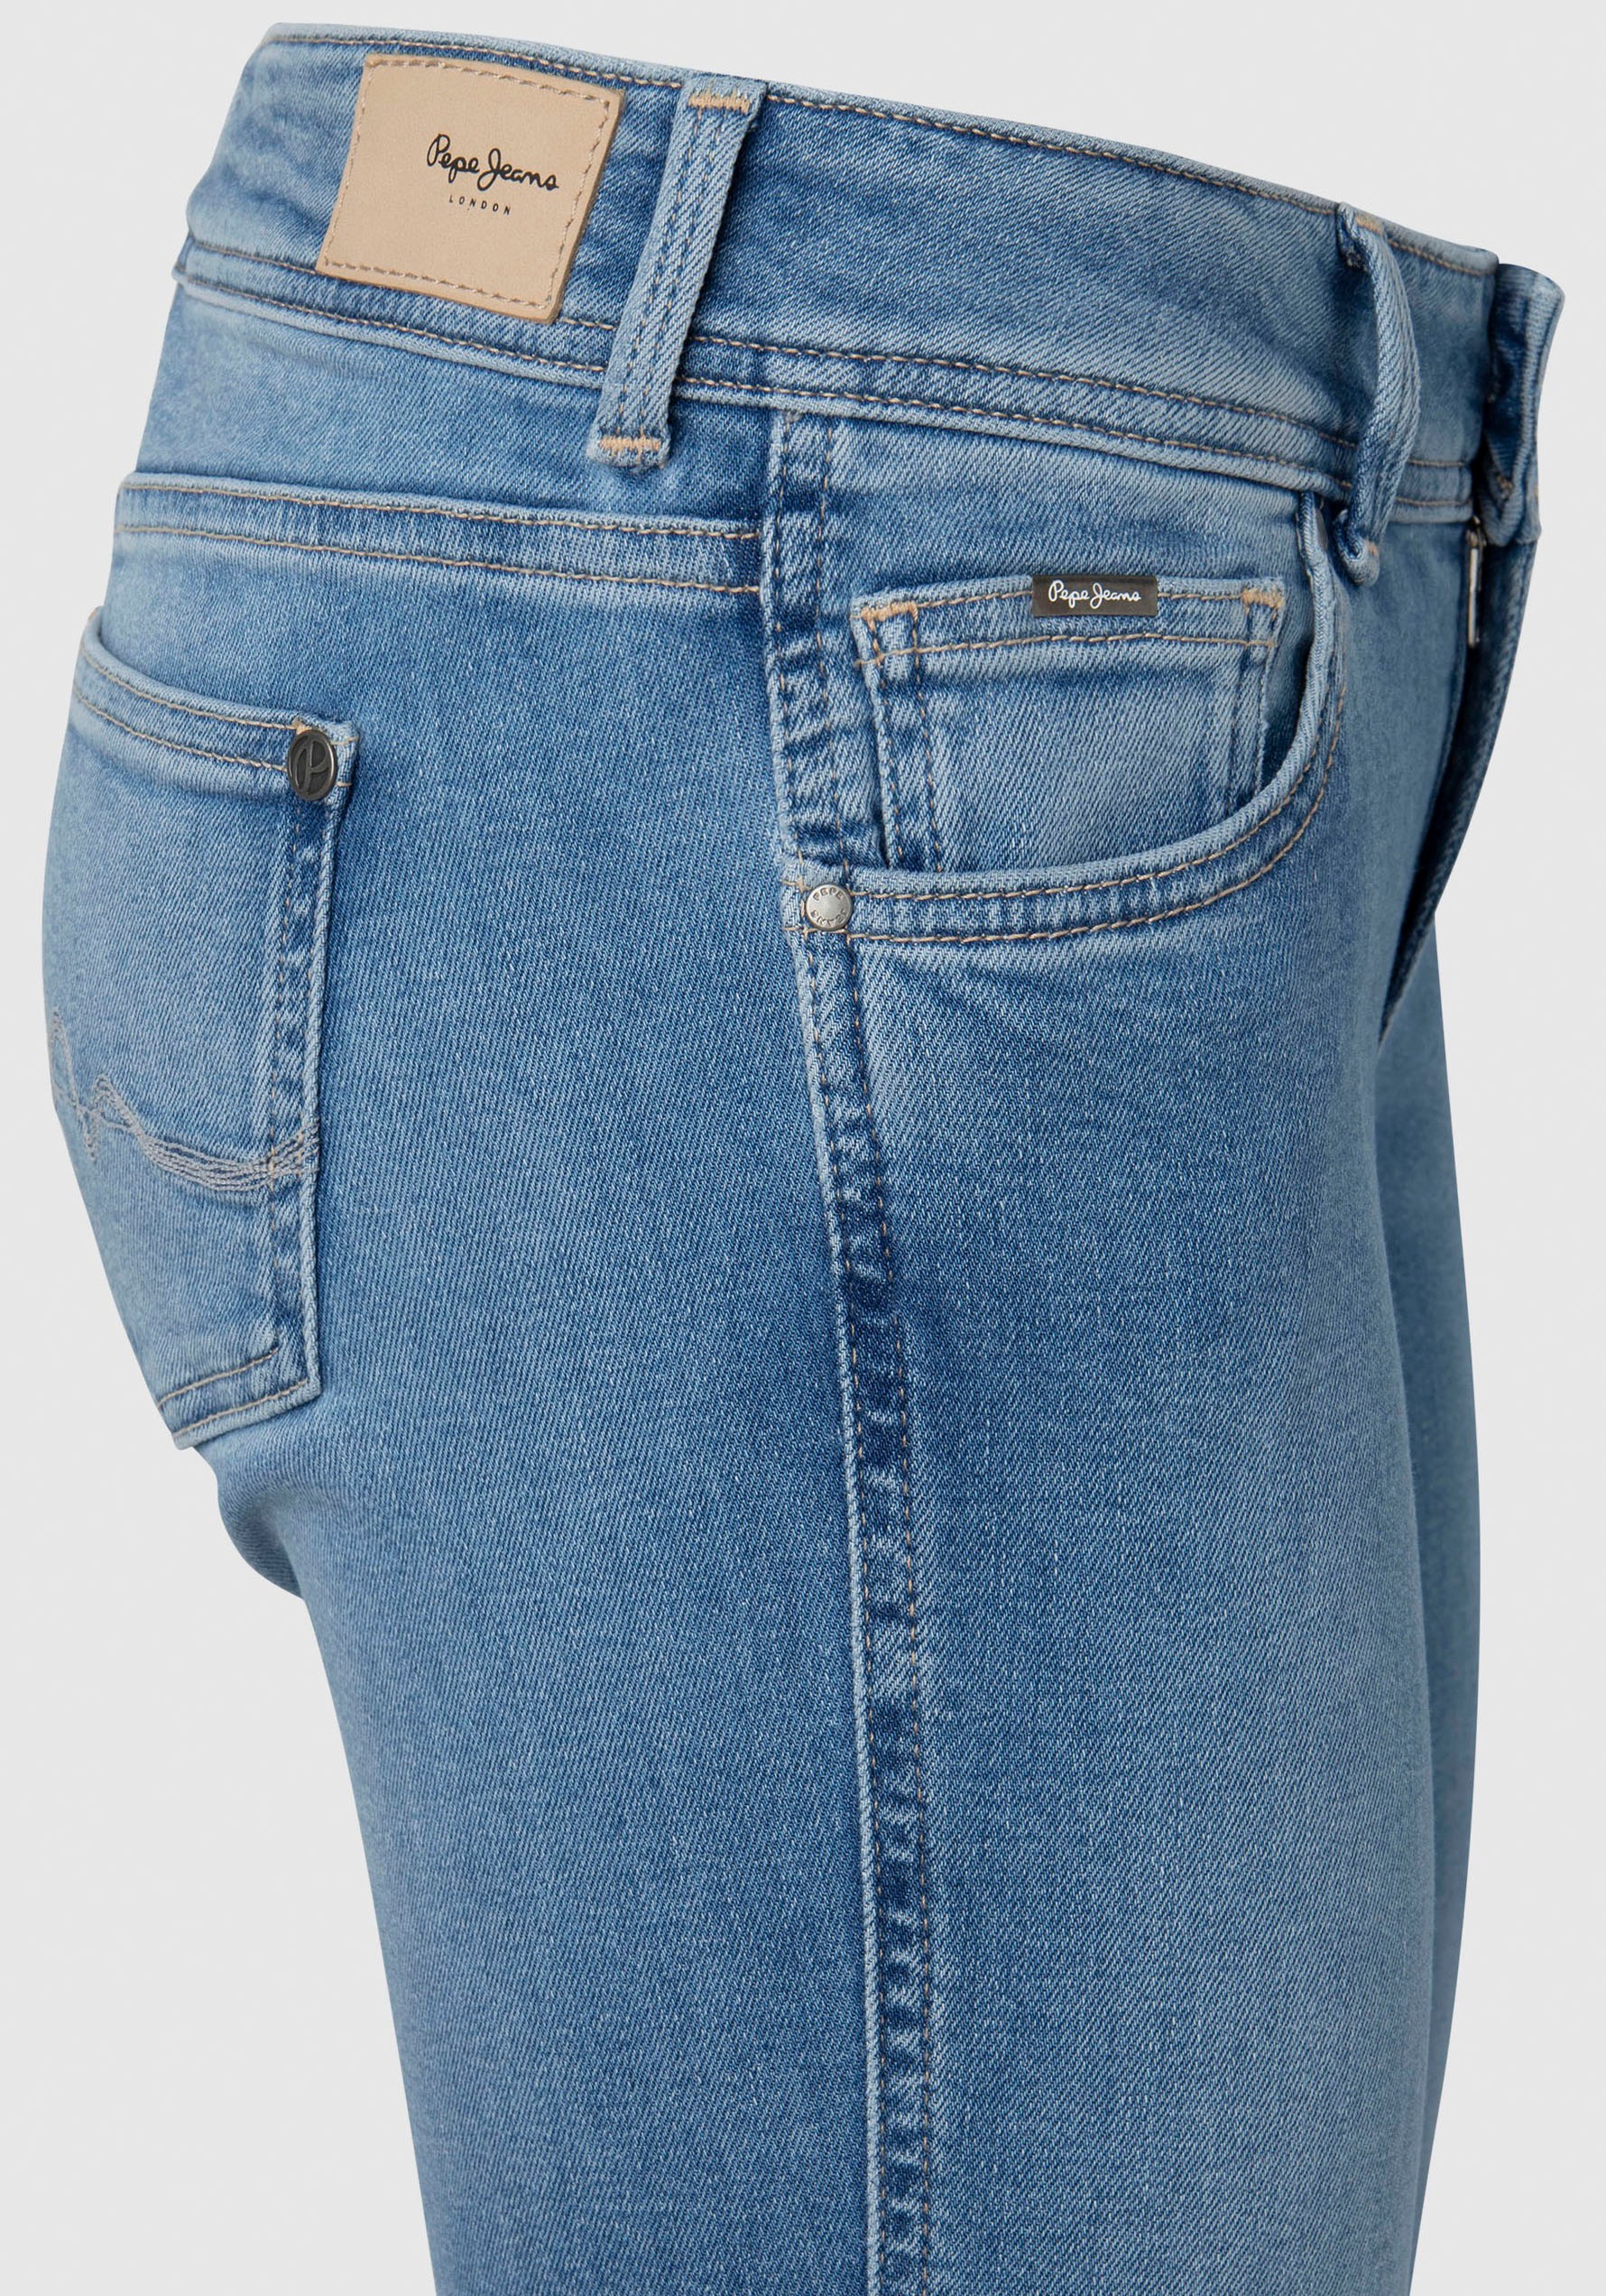 Pepe bei Jeans ♕ »NEW PIMLICO« Bootcut-Jeans